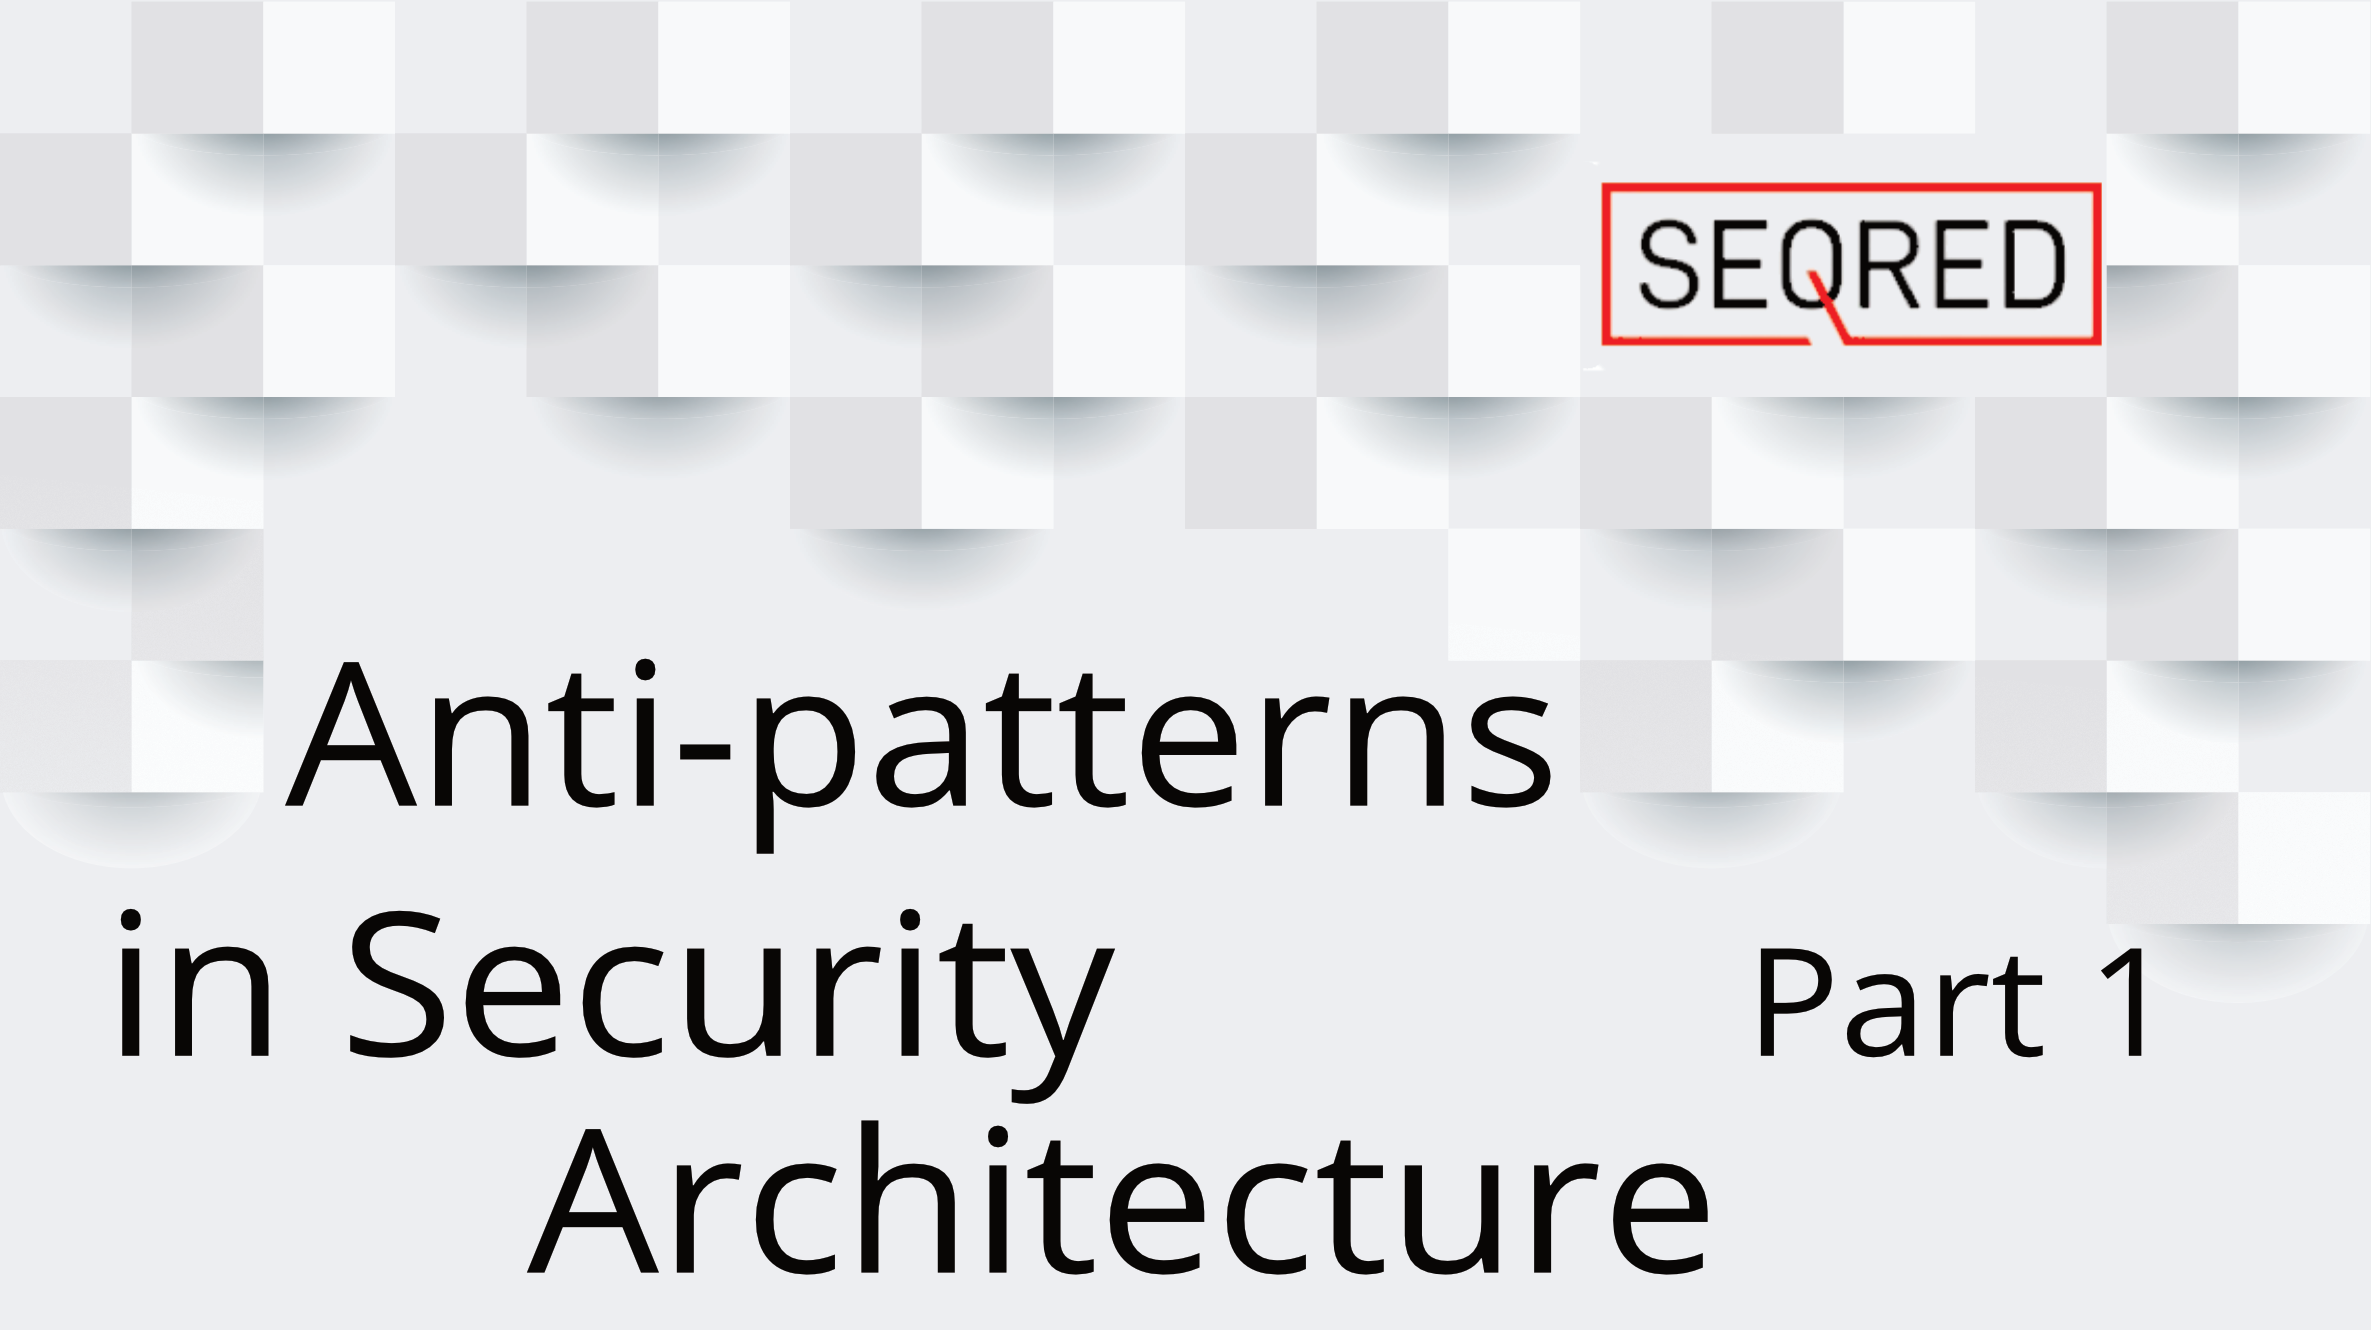 Anit-patterns in security architecture